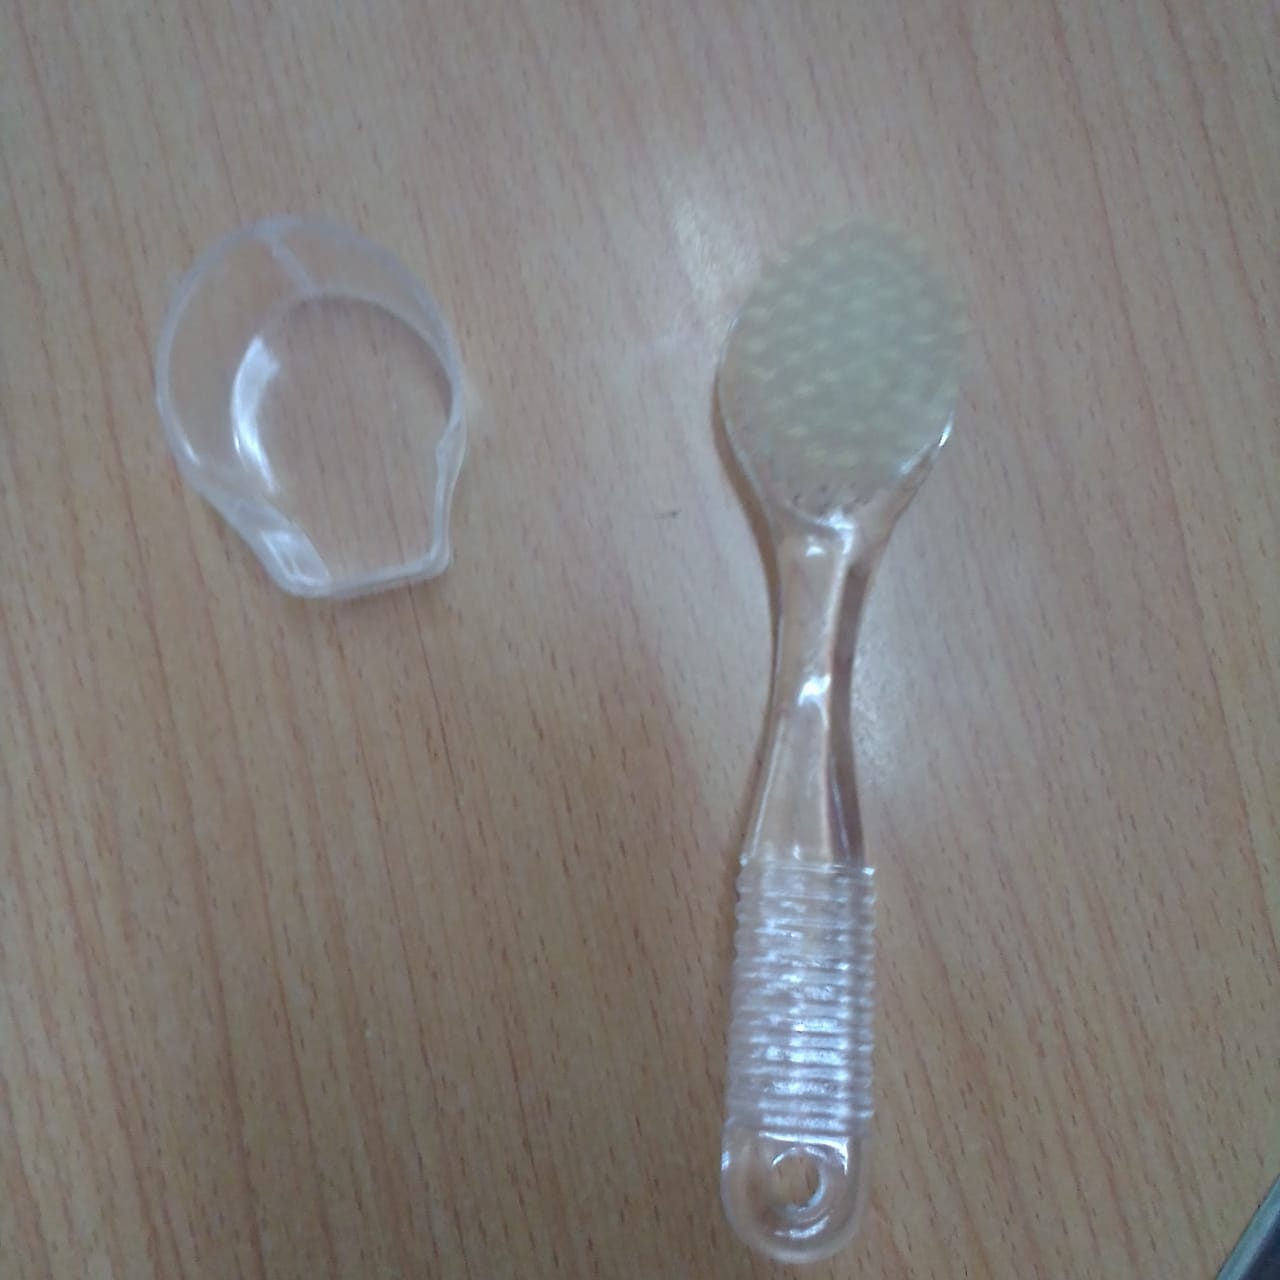 Clear Face Brush With Cap